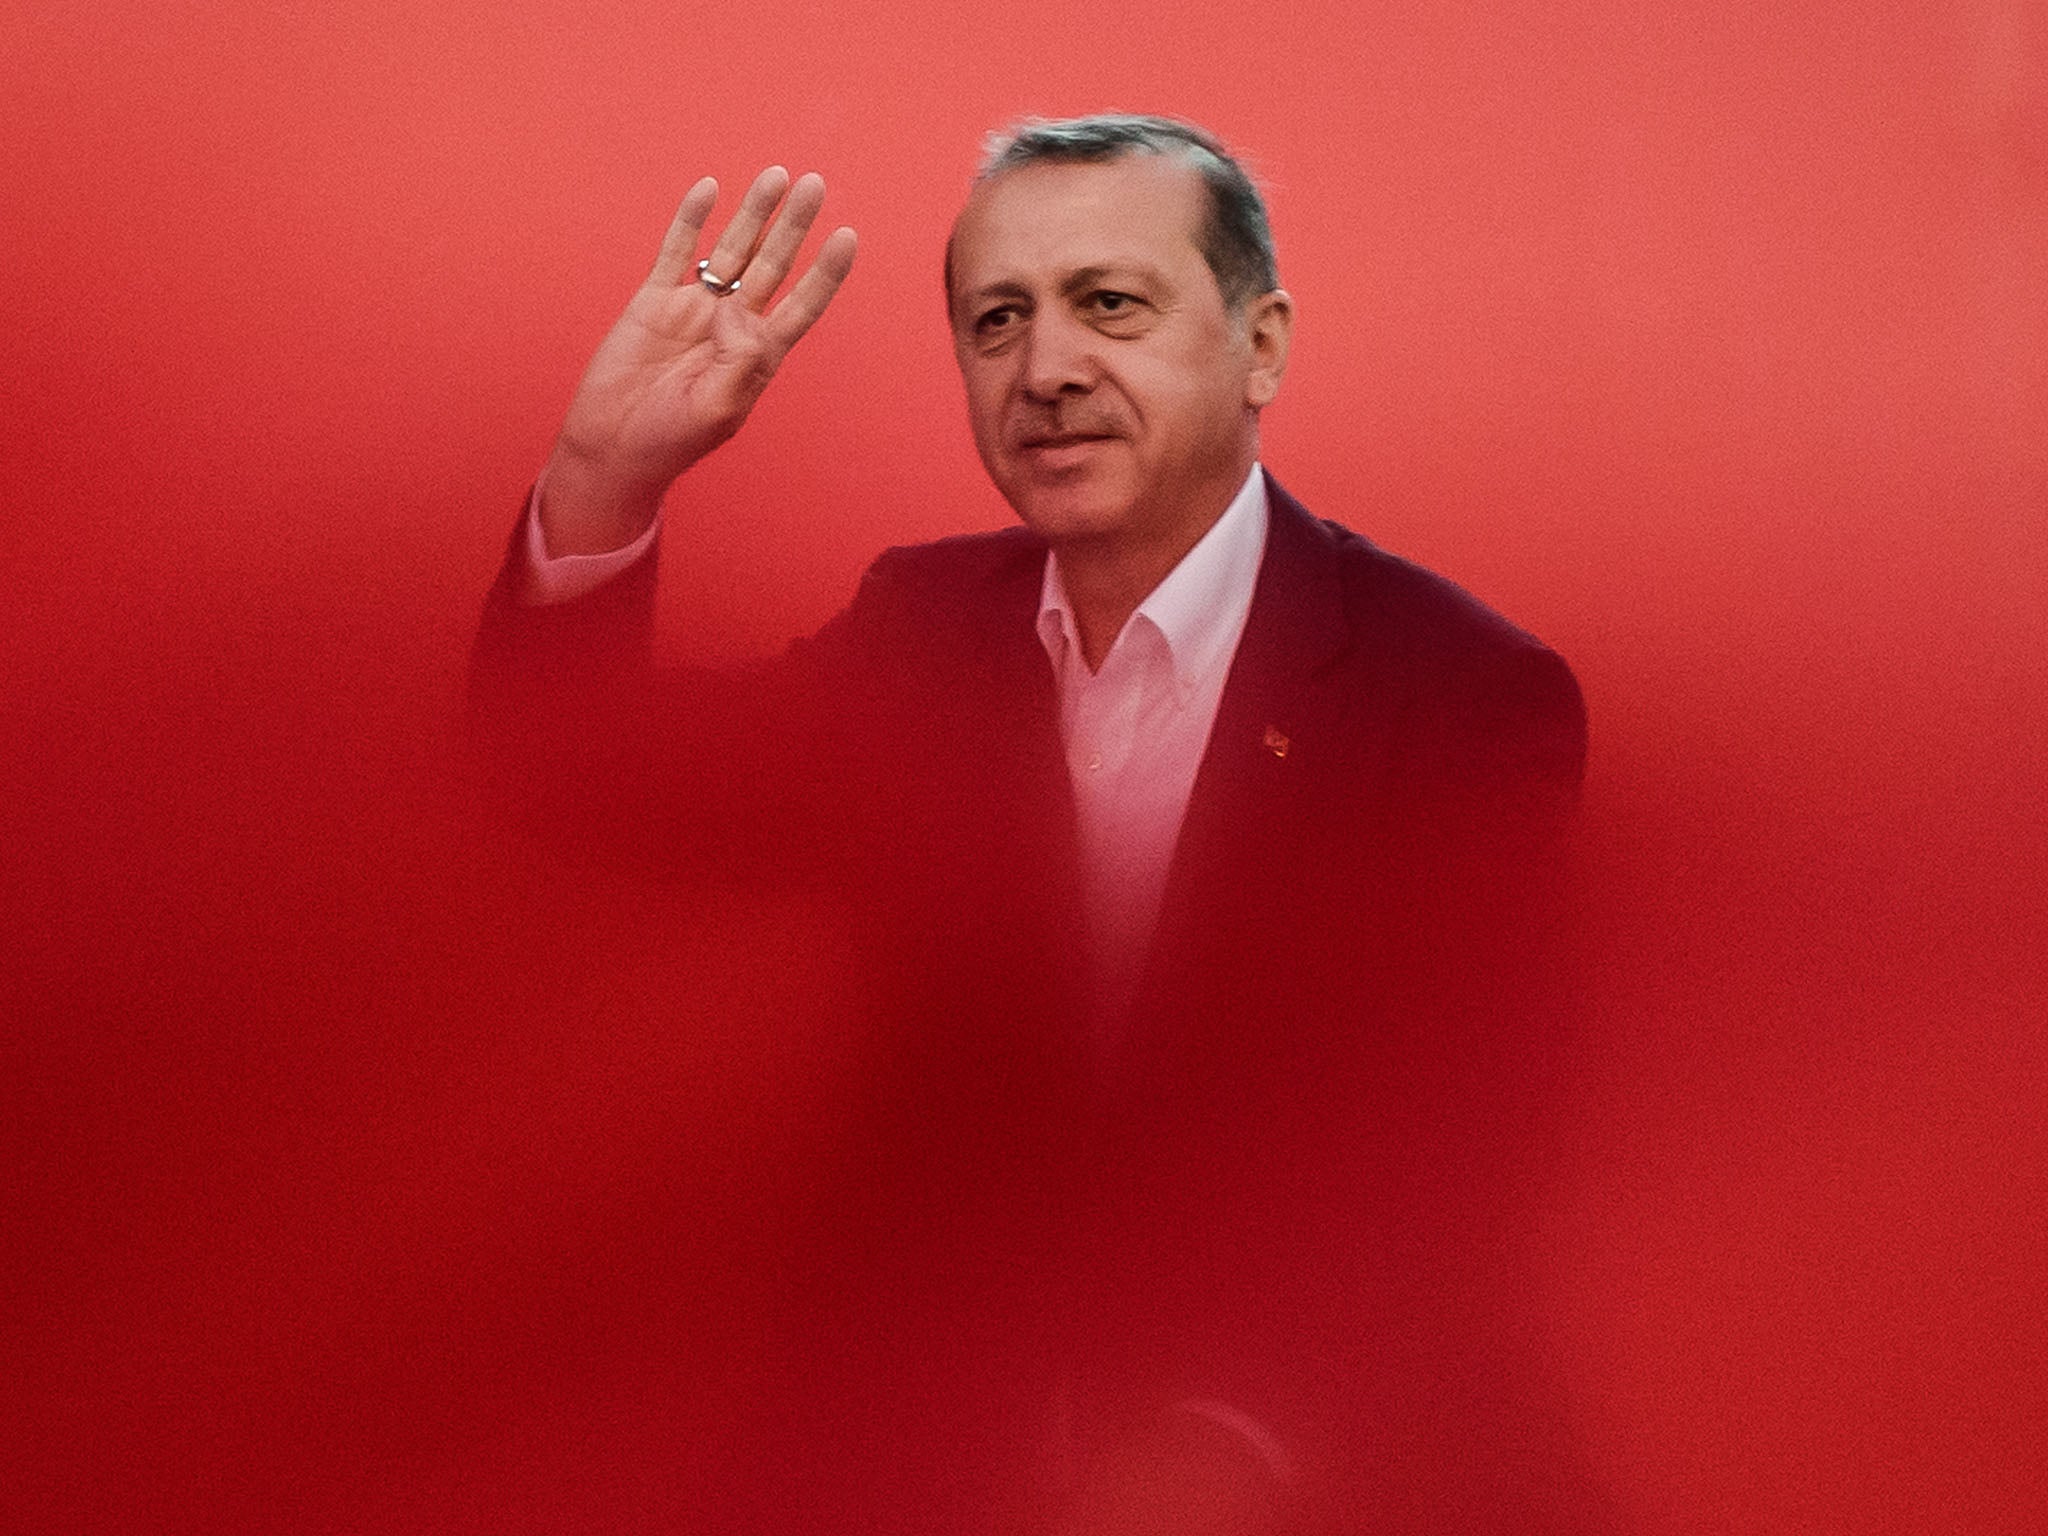 President Erdogan addressed millions at a rally in Istanbul in which he said he would back the return of the death penalty